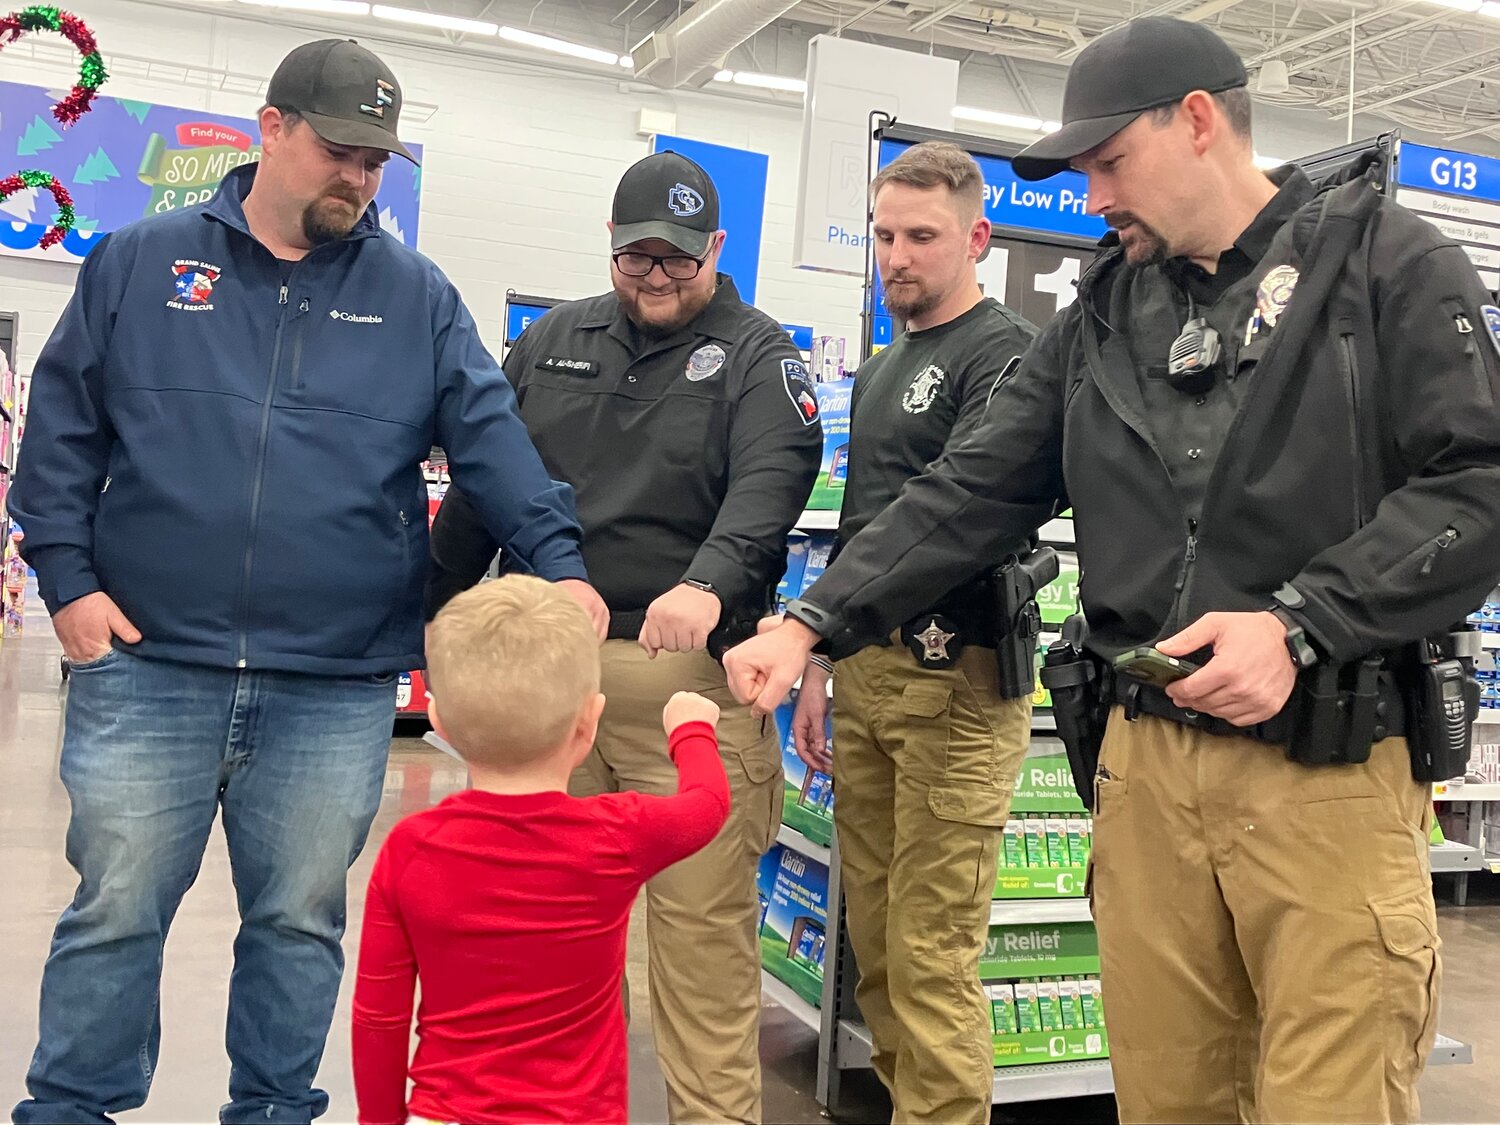 Connor fist bumps the officers helping him shop during last Tuesday’s Blue Santa at Walmart in Mineola.